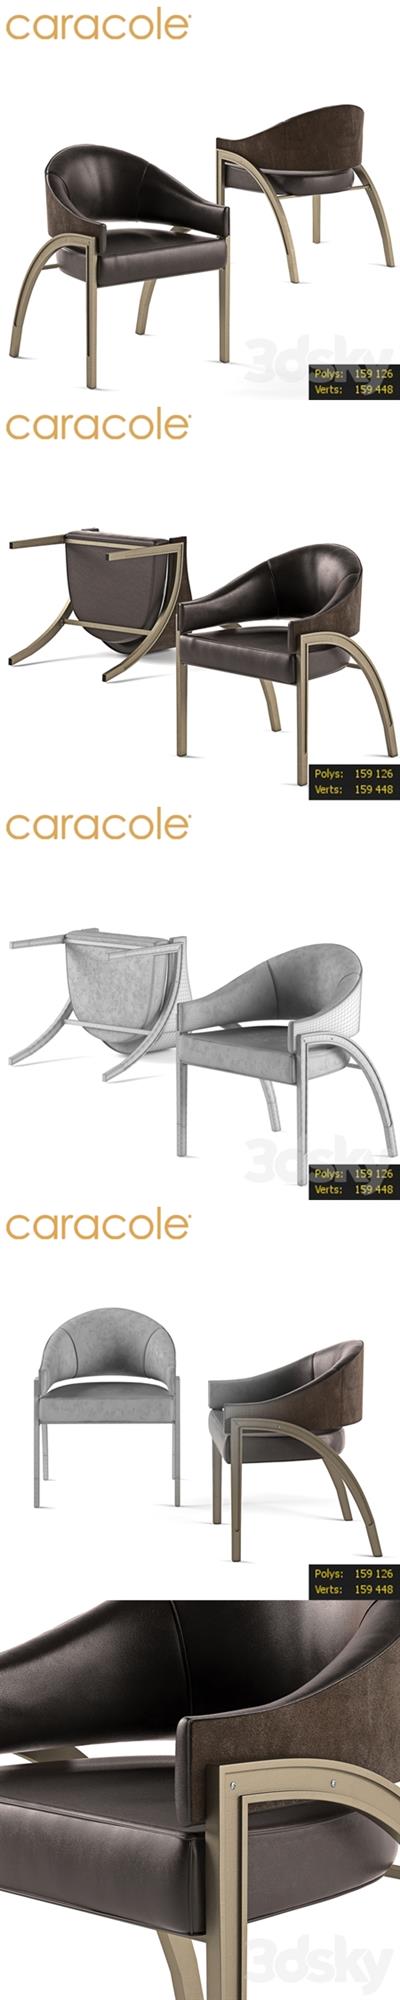 Architects Chair by Caracole